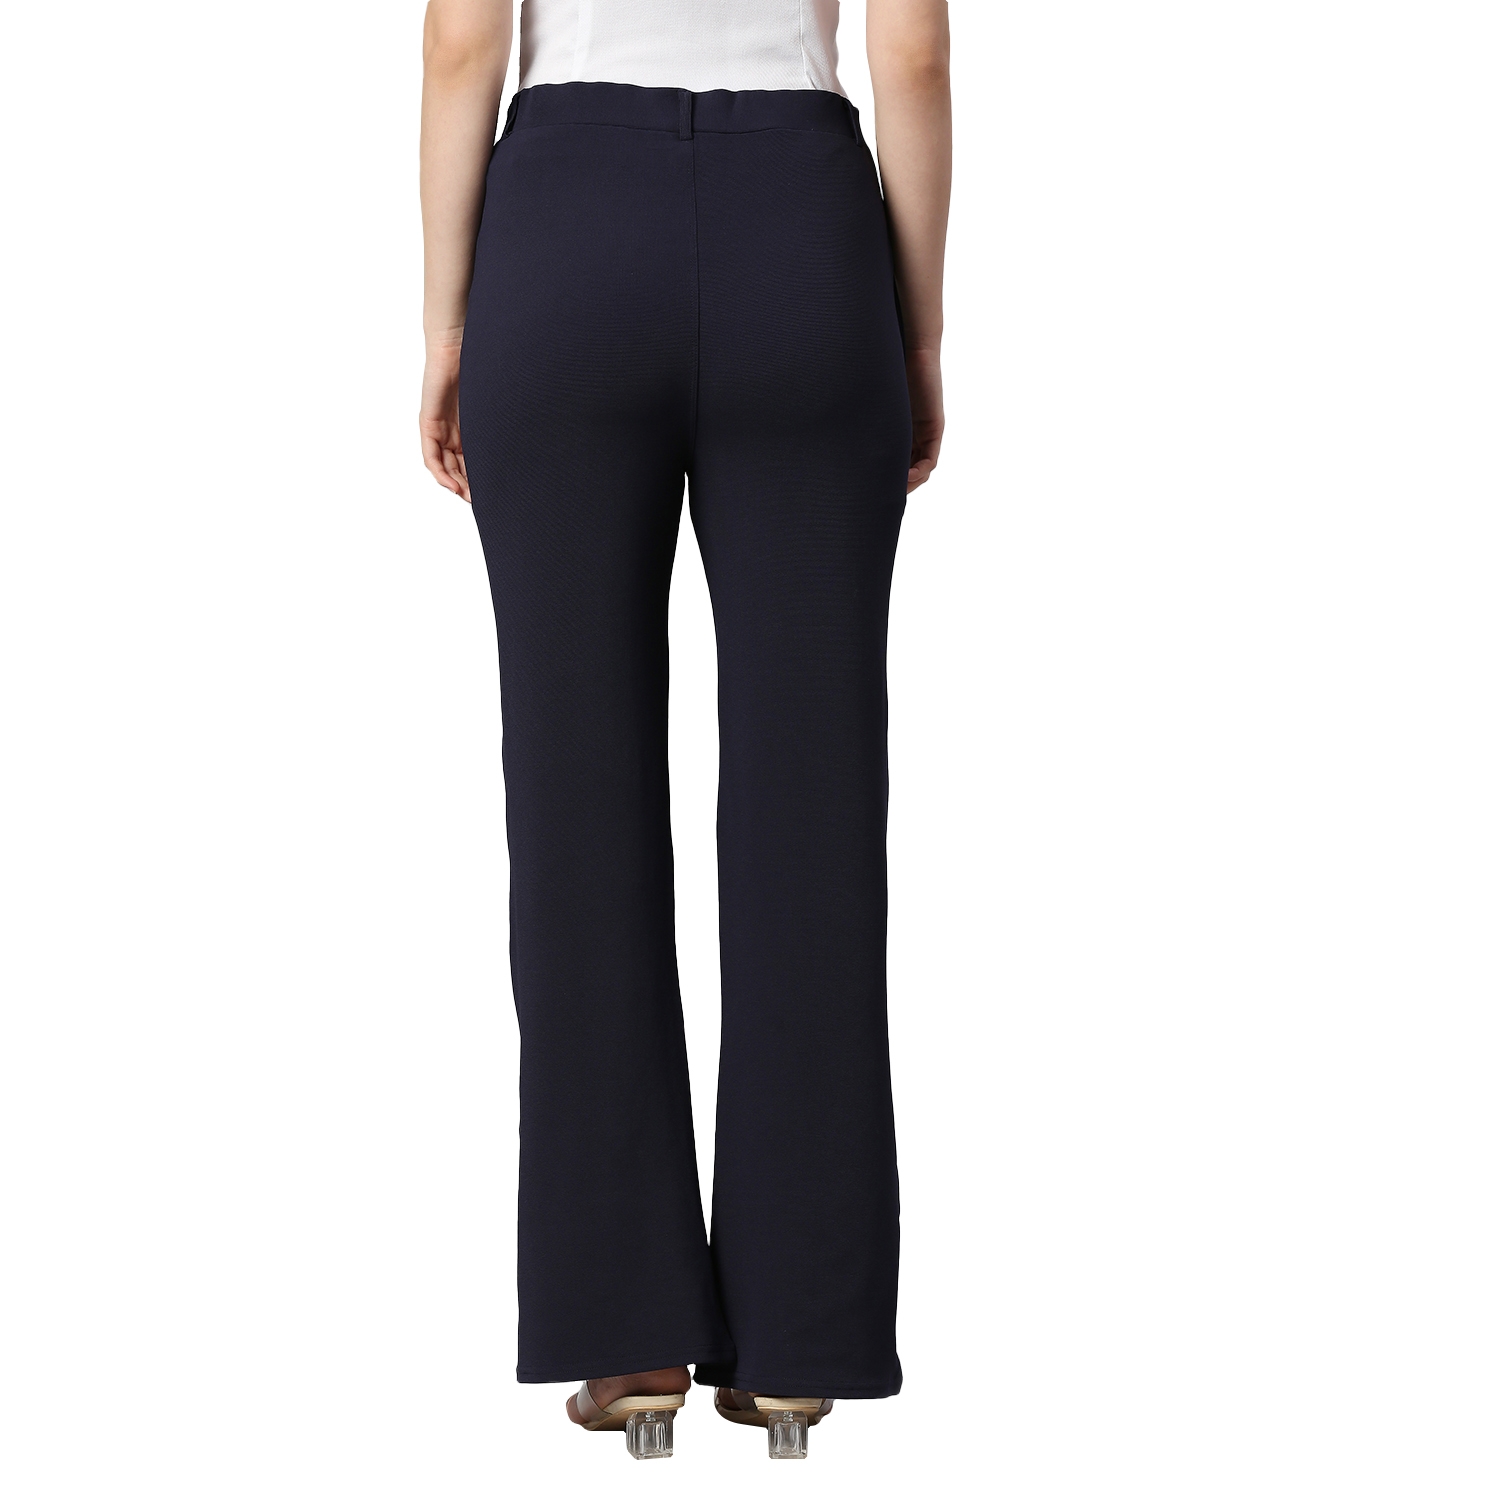 MUGLER Wide & Flare Pants for Women sale - discounted price | FASHIOLA INDIA